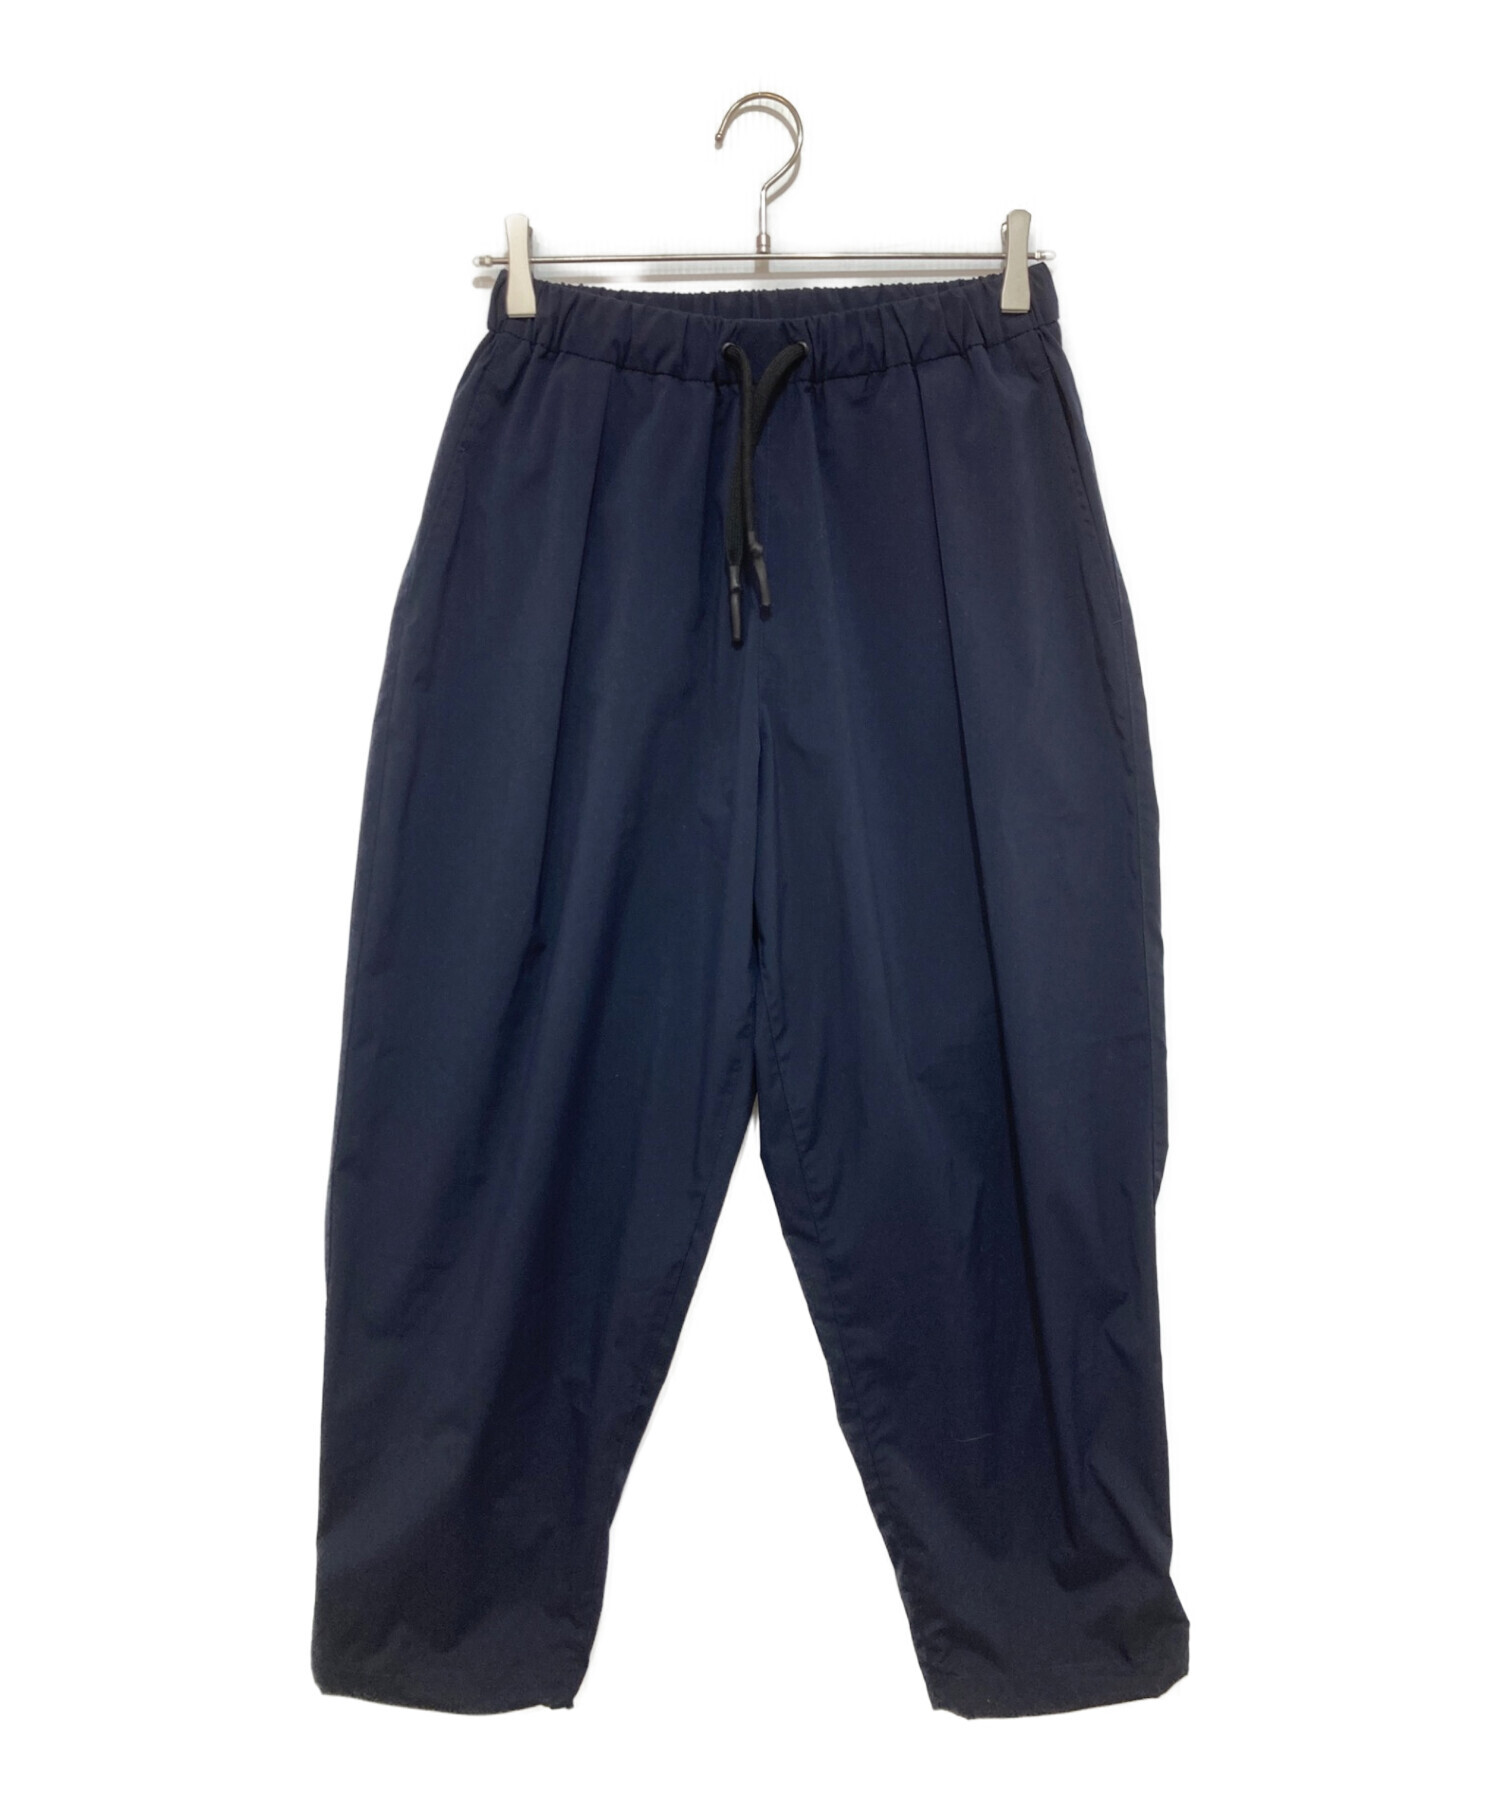 UNTRACE (アントレース) WATER REPELLENT TAPERED STRETCH TRACK PANTS ネイビー